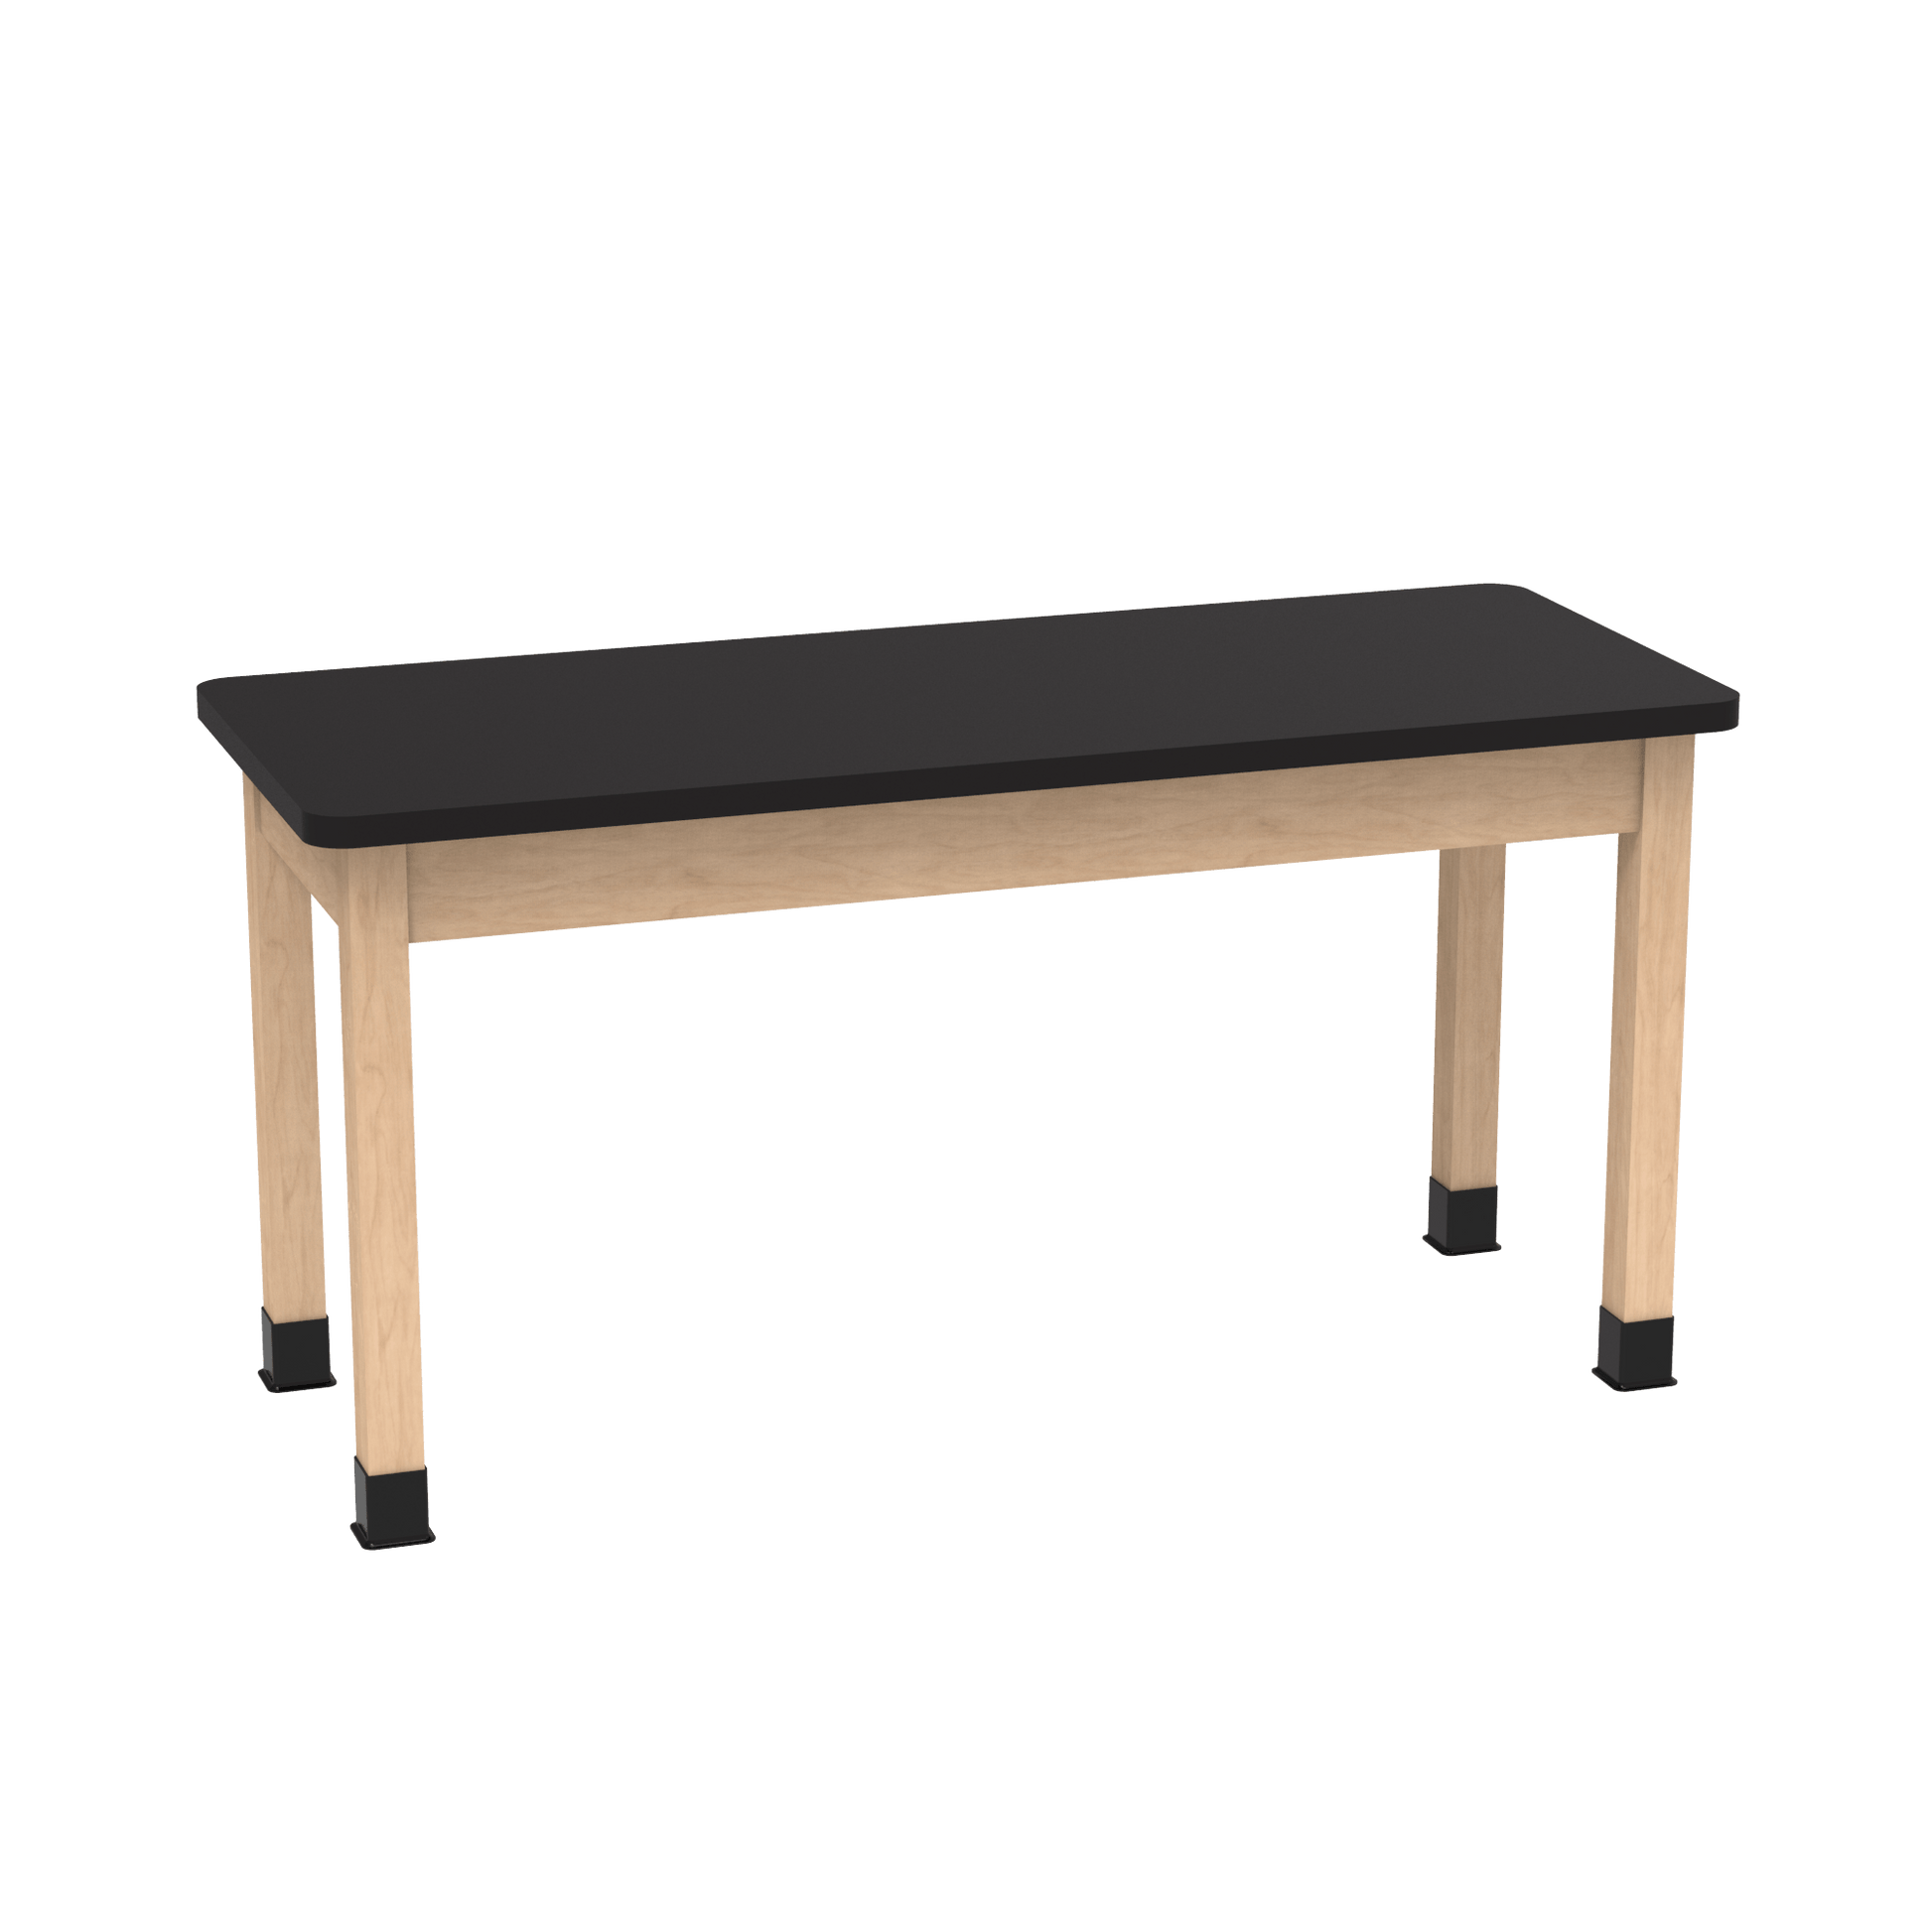 Diversified Woodcrafts Instructor's Drafting Table 72 IDT-103